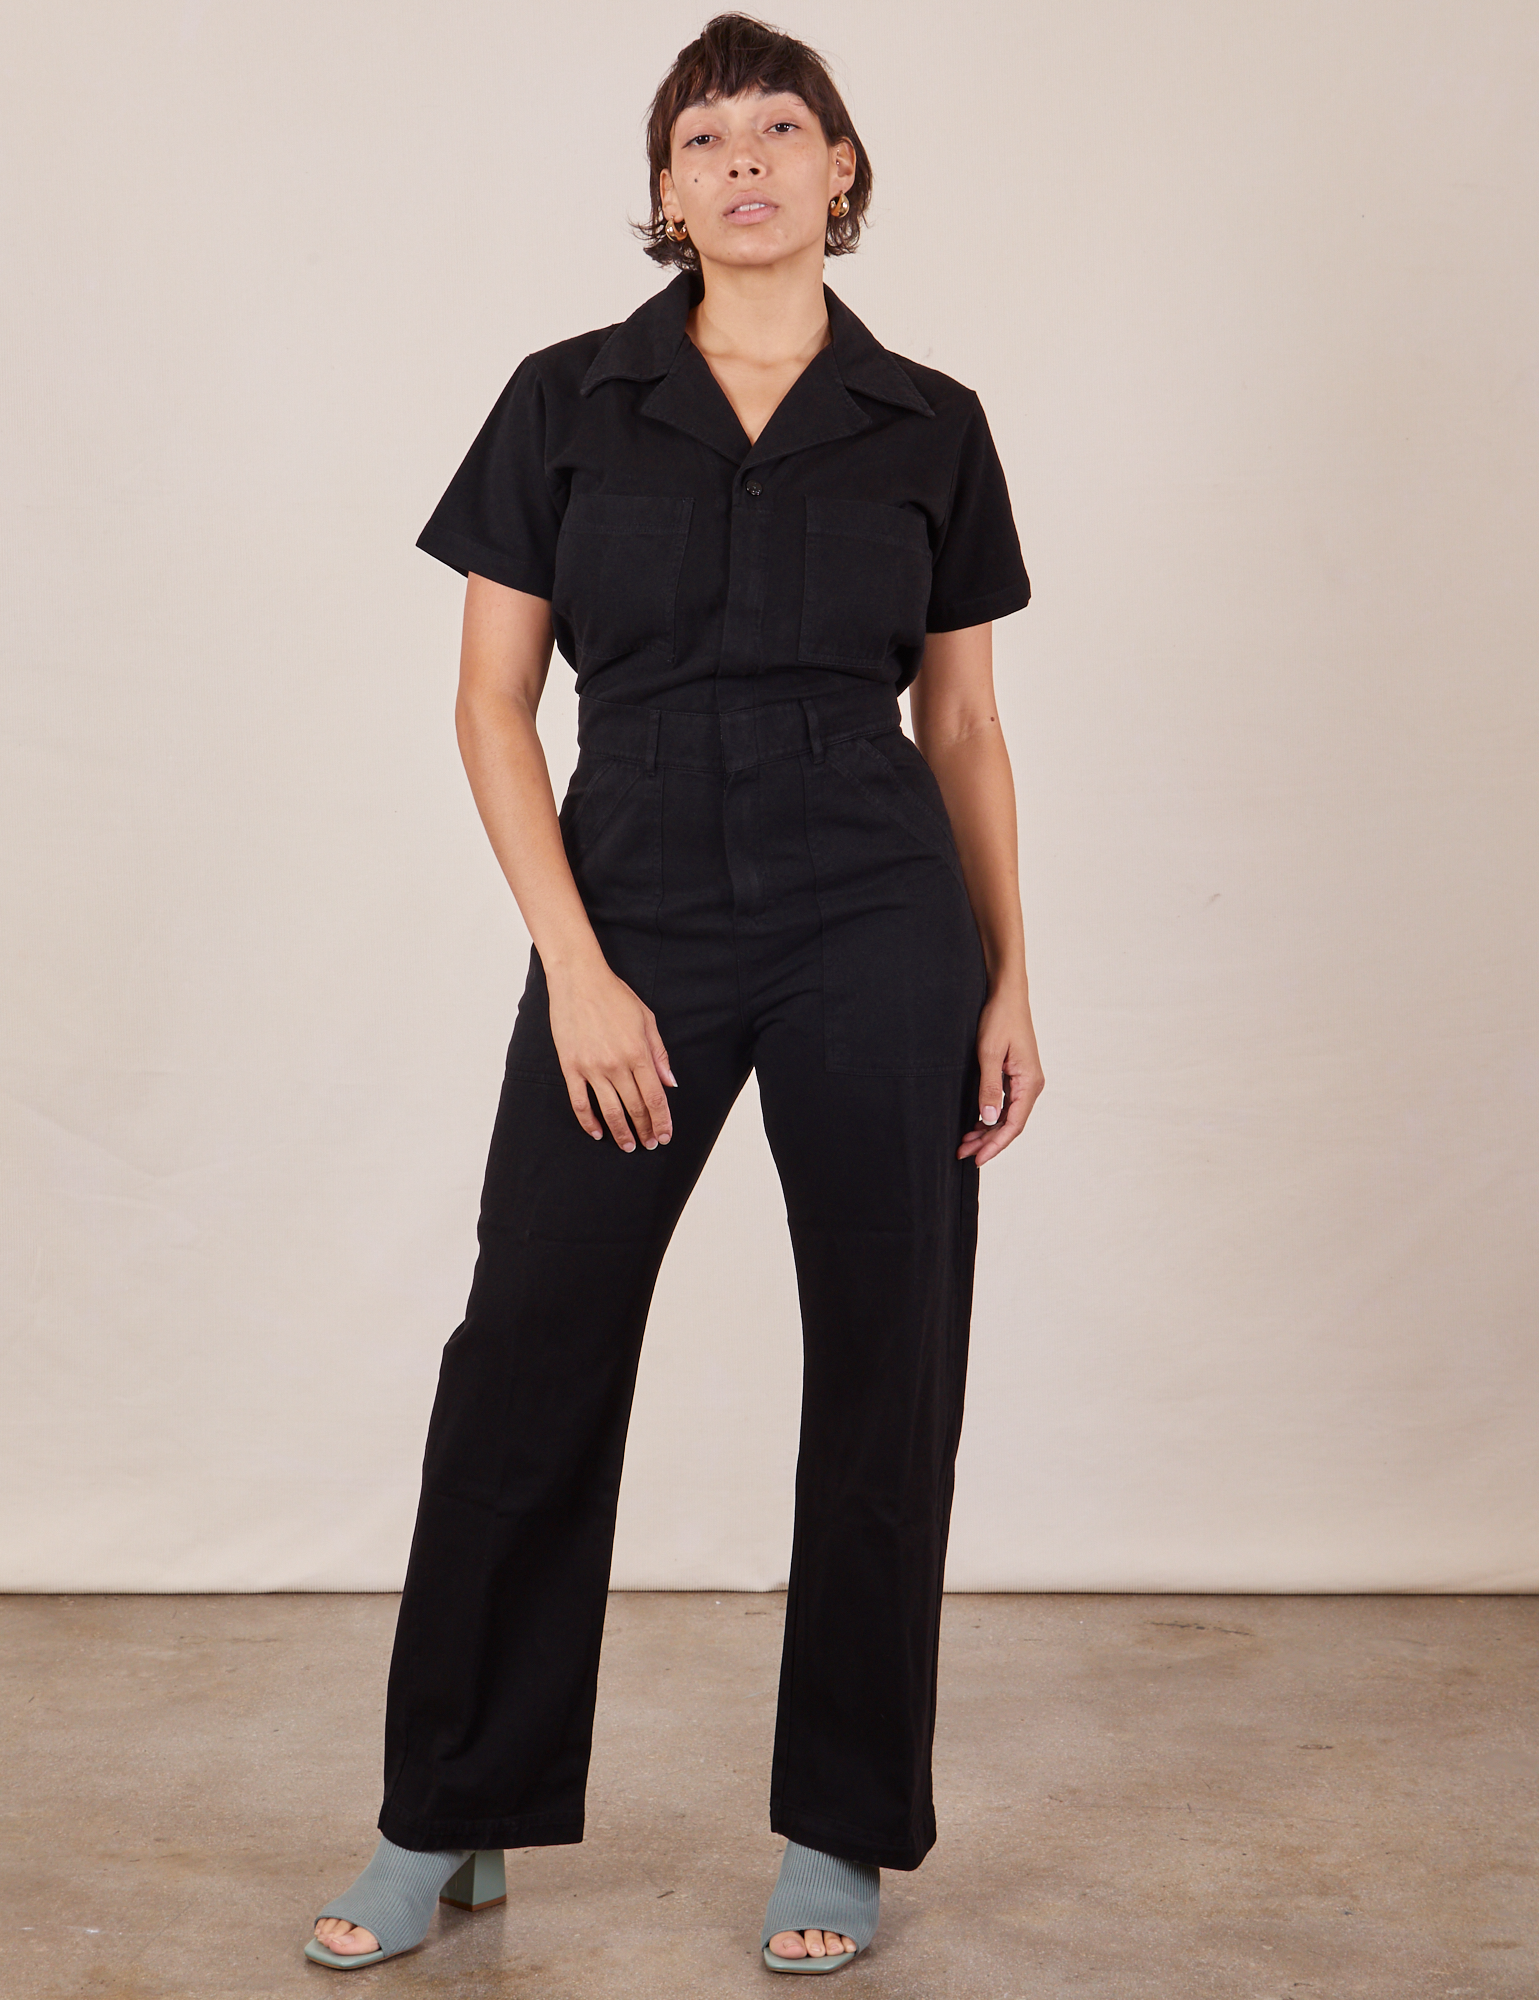 Tiara is 5&#39;4&quot; and wearing S Short Sleeve Jumpsuit in Basic Black